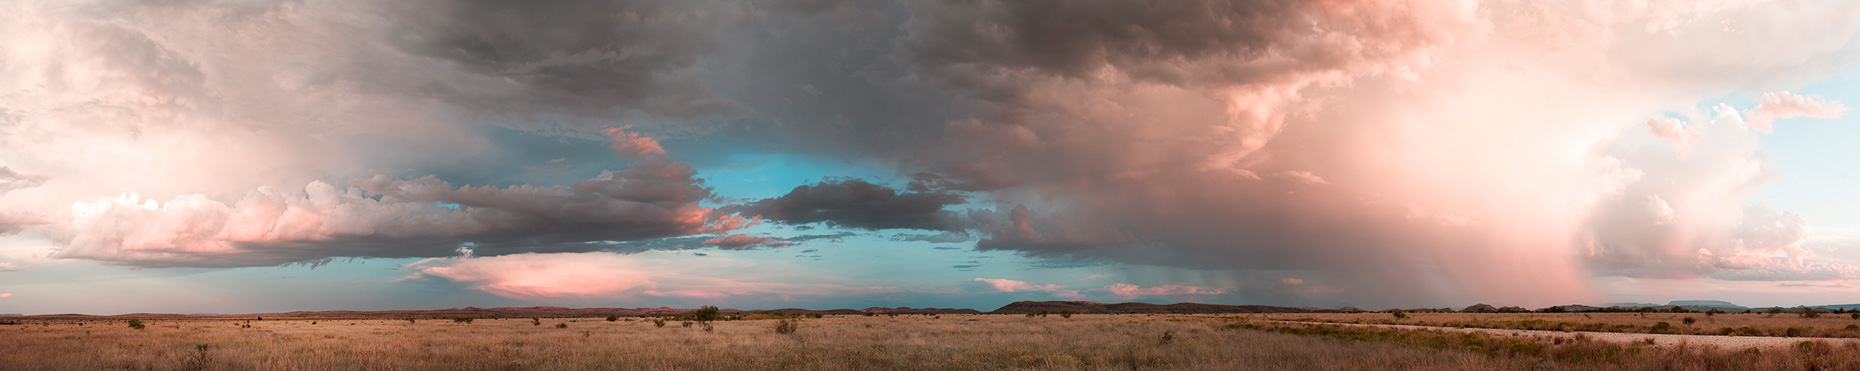 Panoramic From Combs Ranch_© James H. Evans